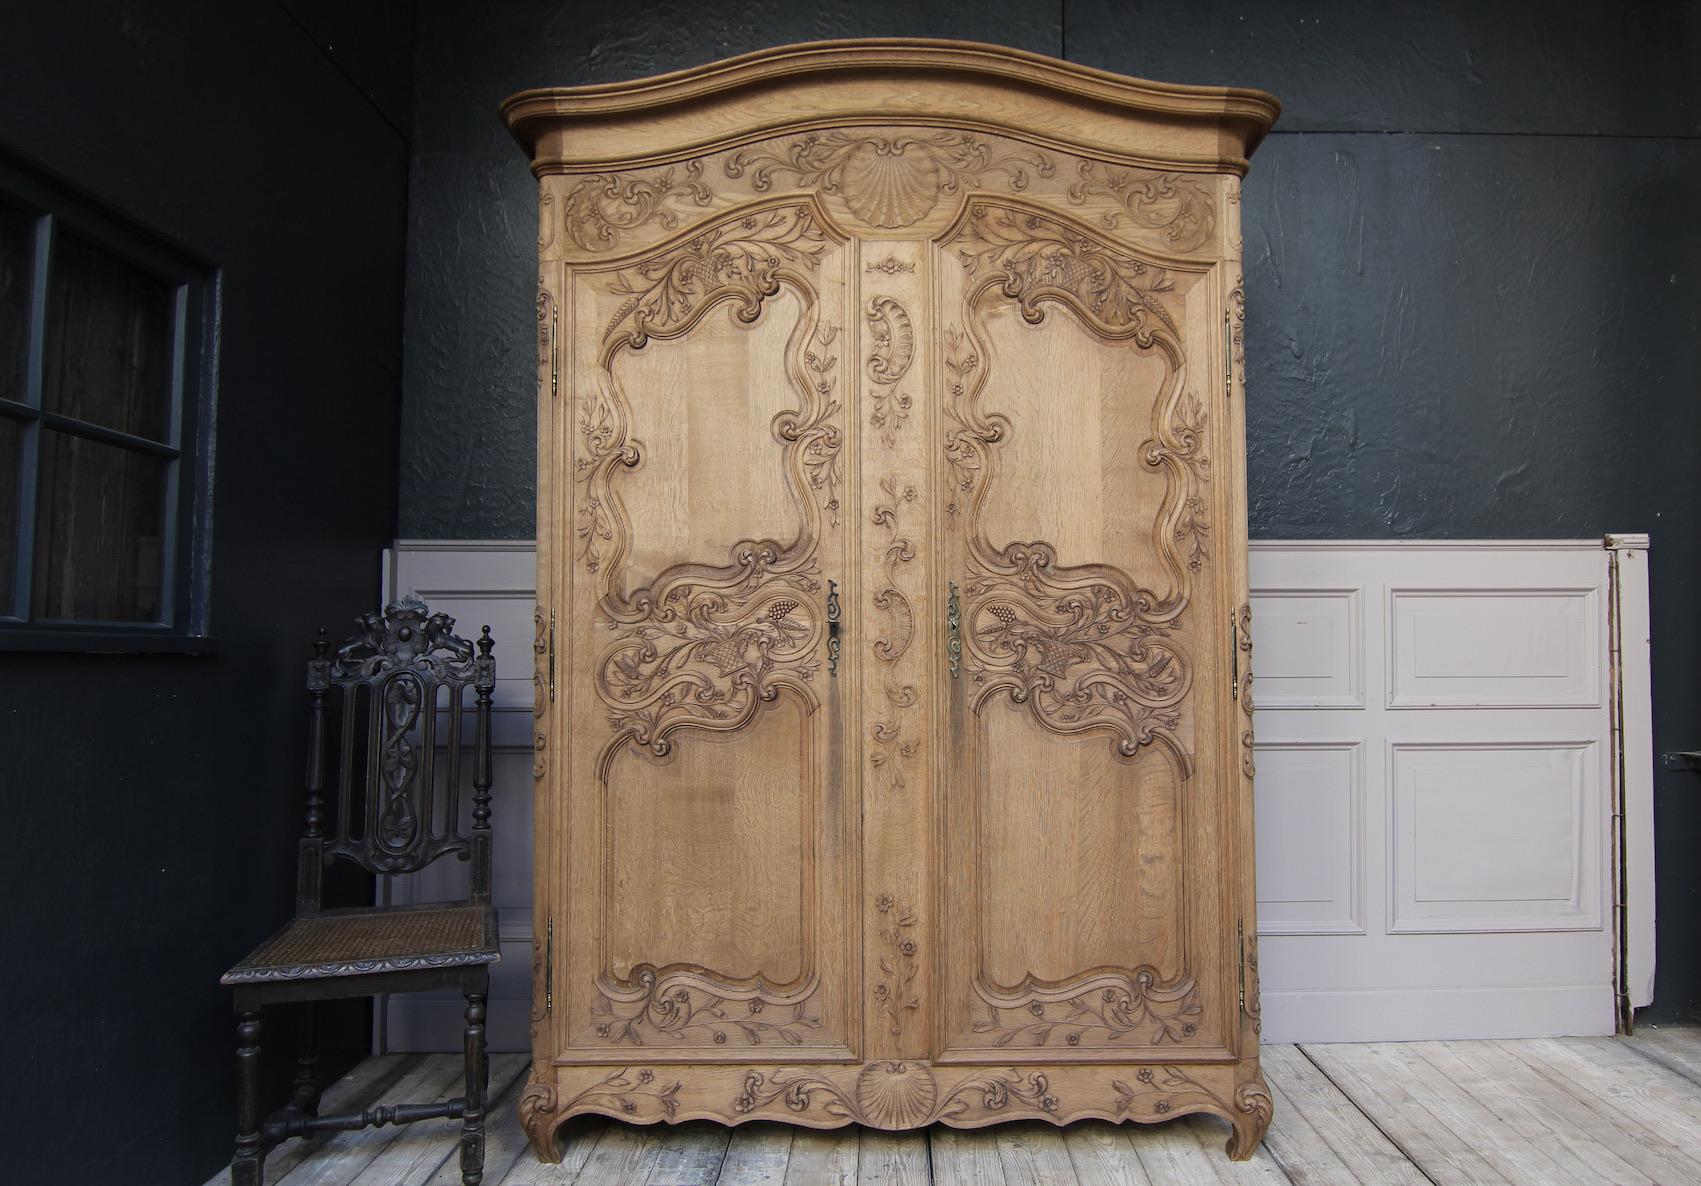 Early 20th century French Armoire in stripped oak. 
A two-door side coffered body with rounded corners and profiled curved cornice. Richly carved floral and rocaille motifs. Doors with carved panels hung on external fitches.

Both doors and the